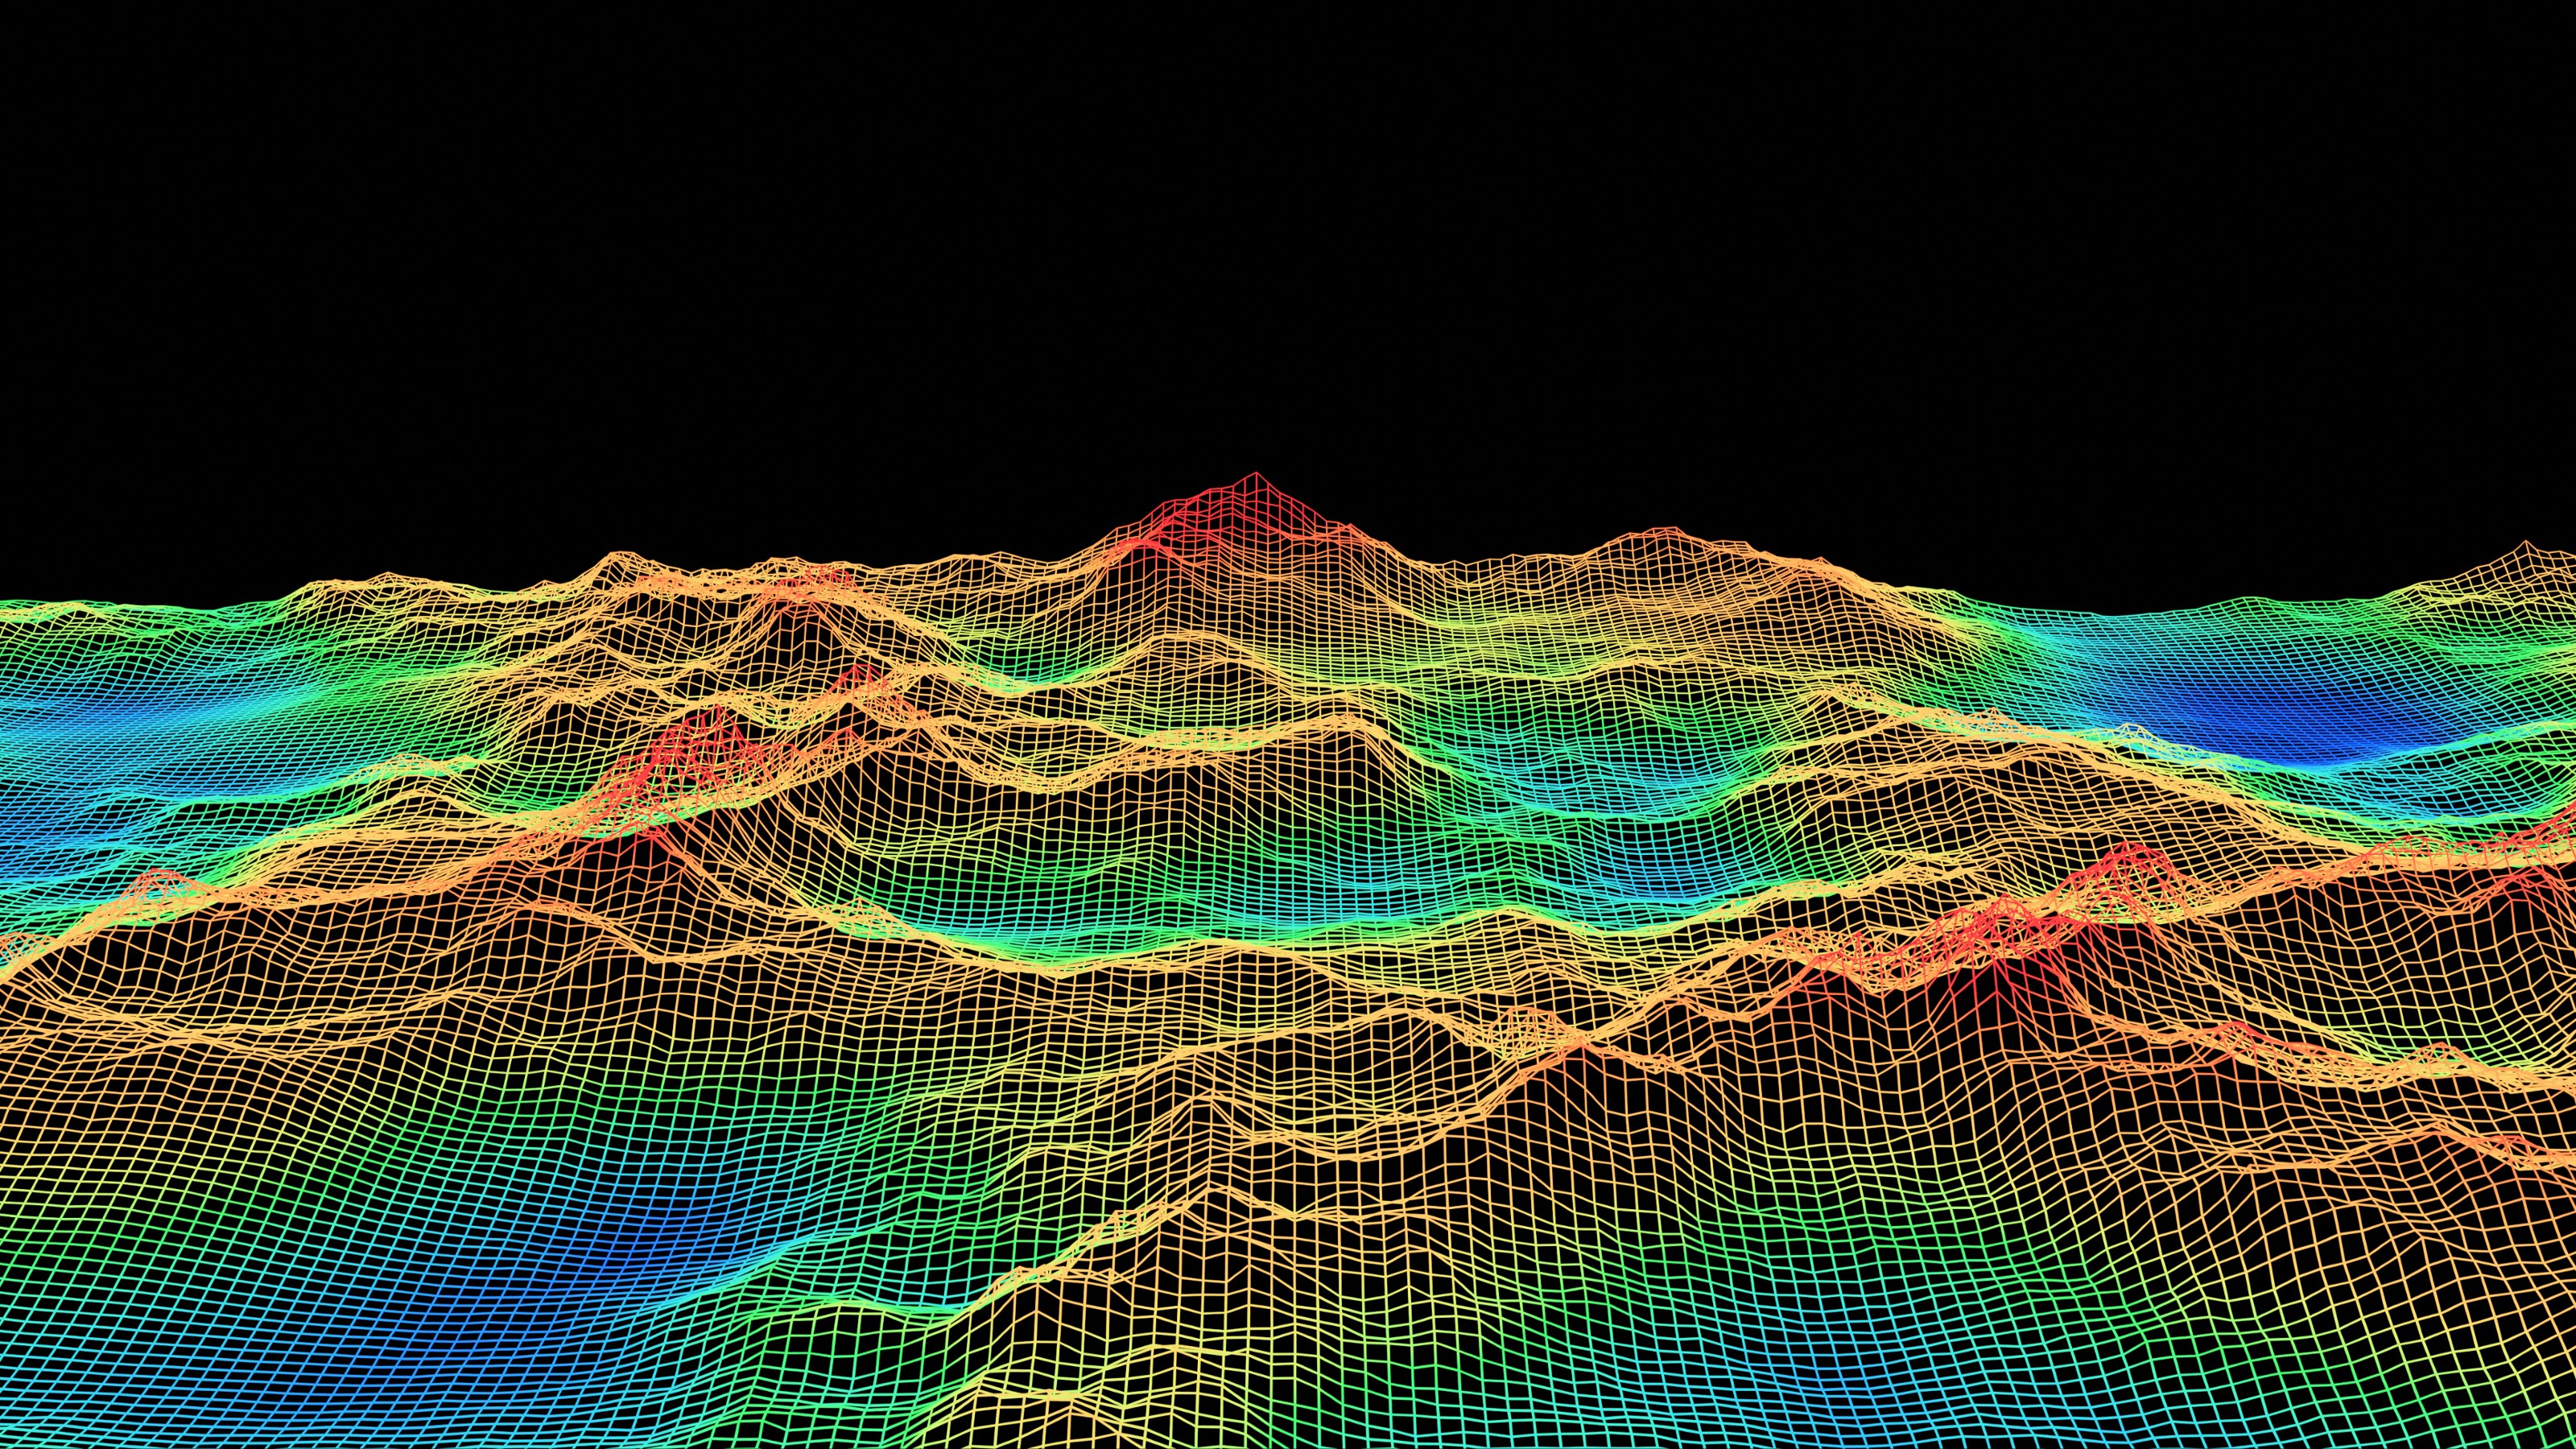 A 3D wireframe representation of mountainous terrain, colored with a gradient from red to blue against a black background.